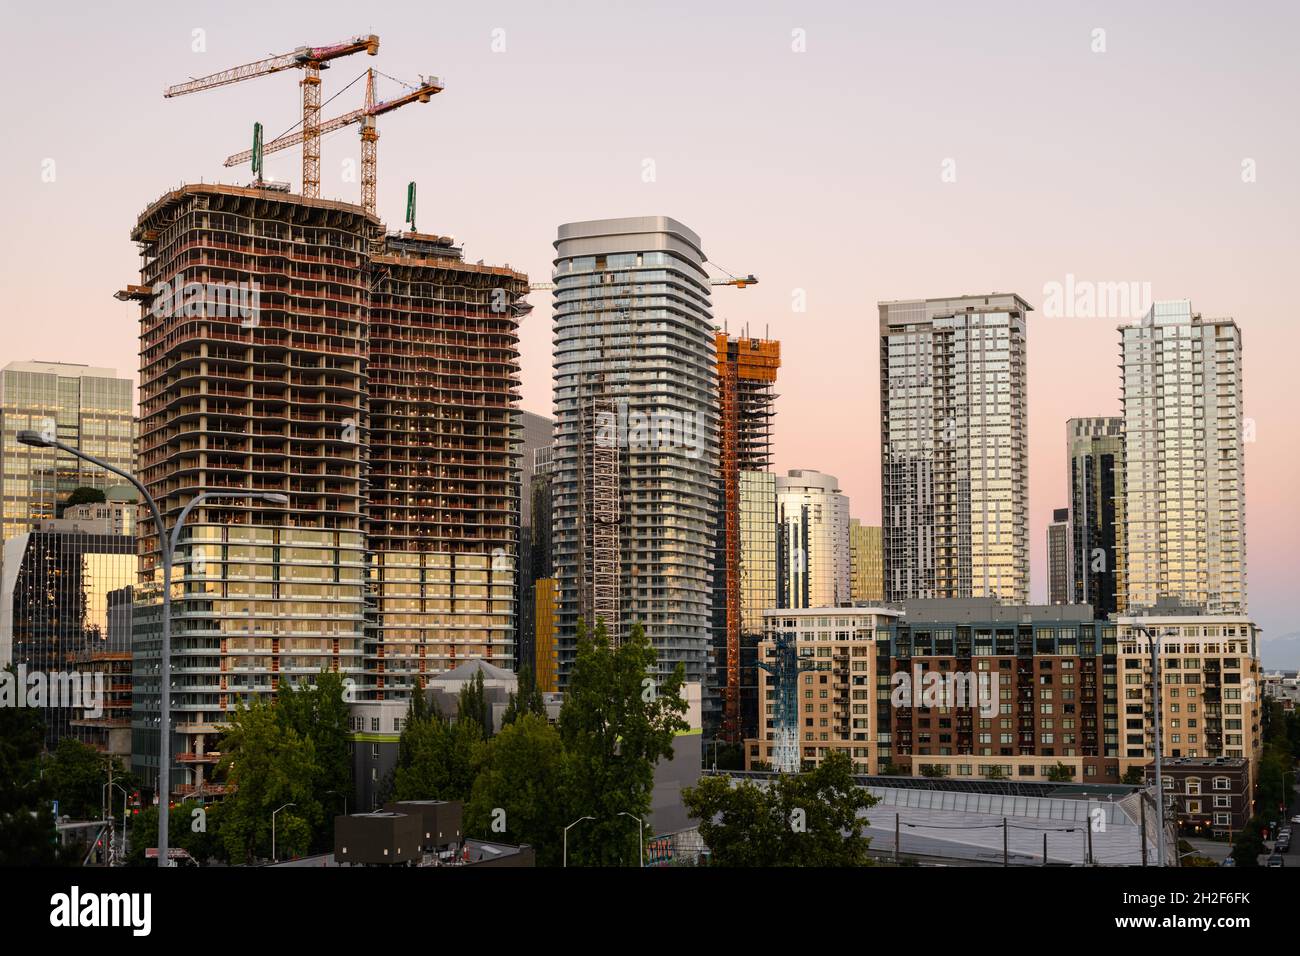 Seattle - July 25, 2021; Construction cranes rise above tall buildings in the downtown core of Seattle at sunrise Stock Photo